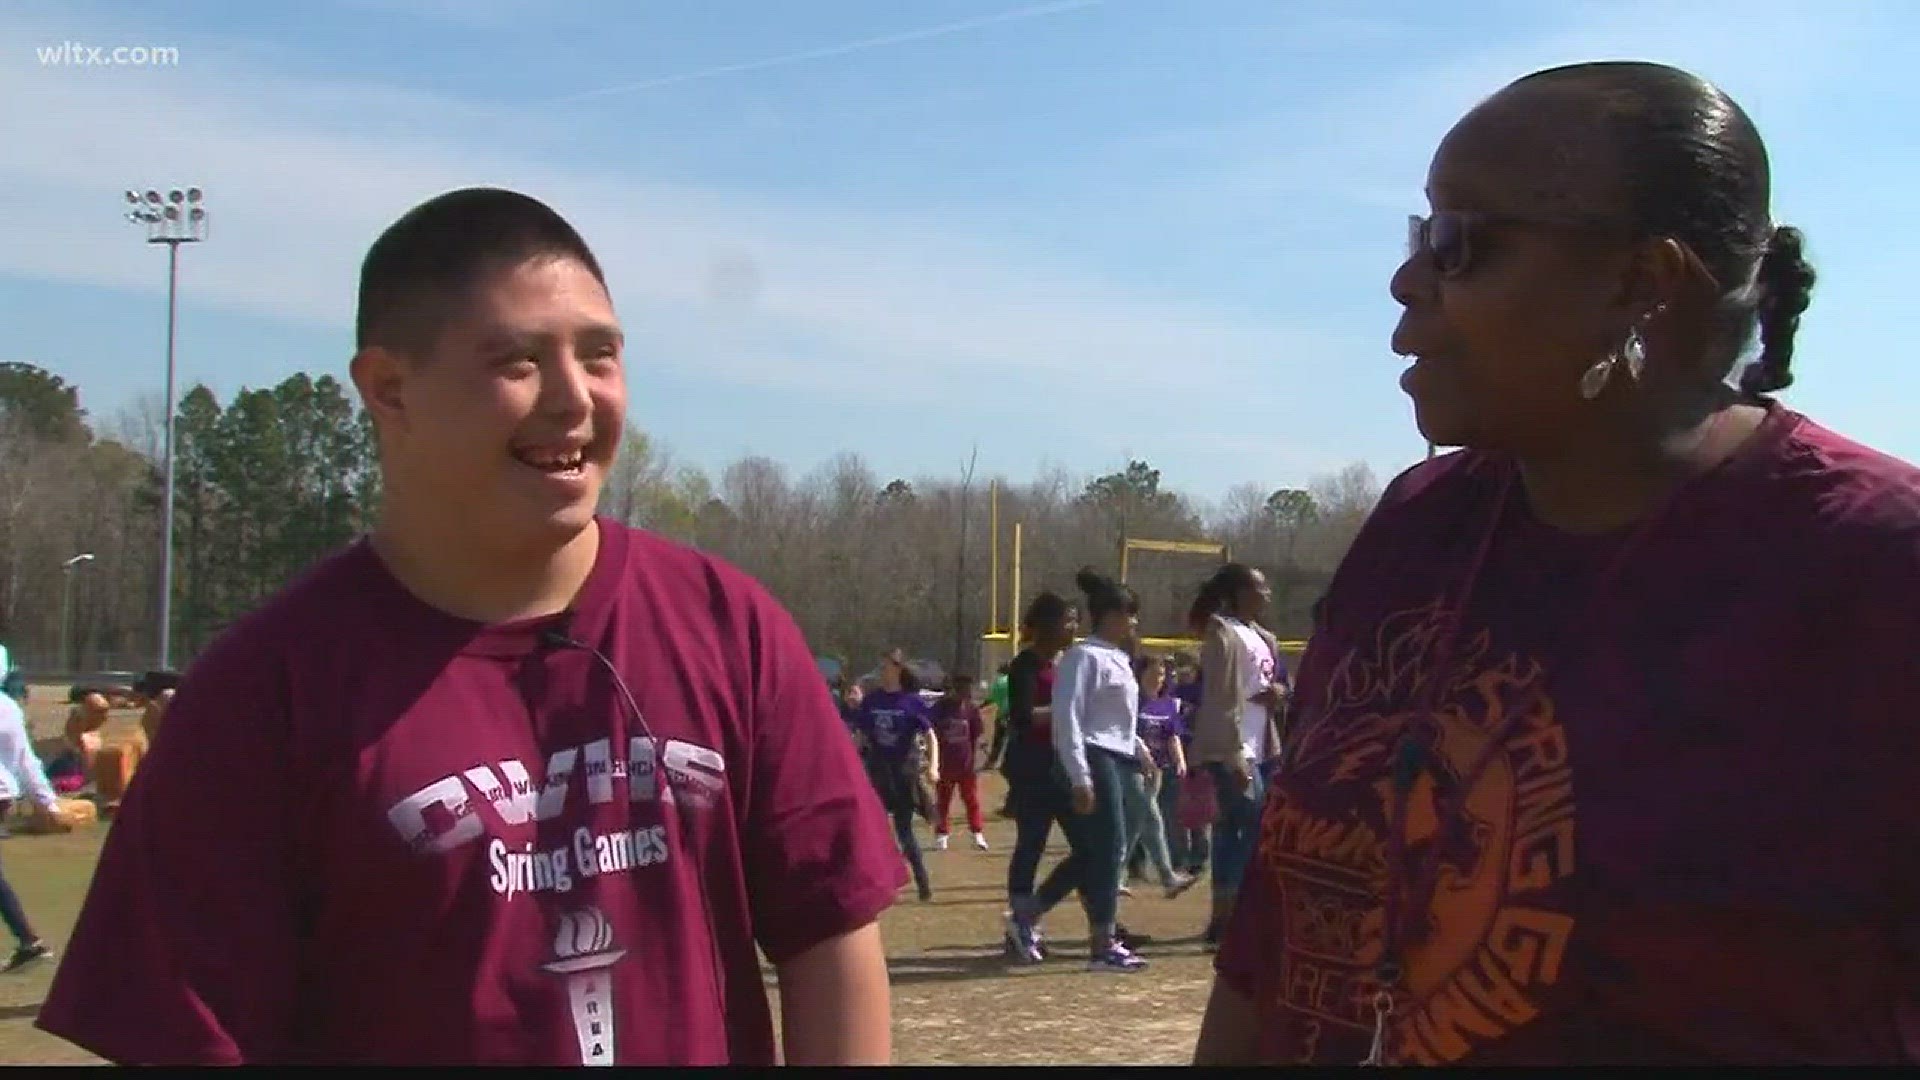 The Special Olympics Brain Games took place at Orangeburg Wilkinson High School today.